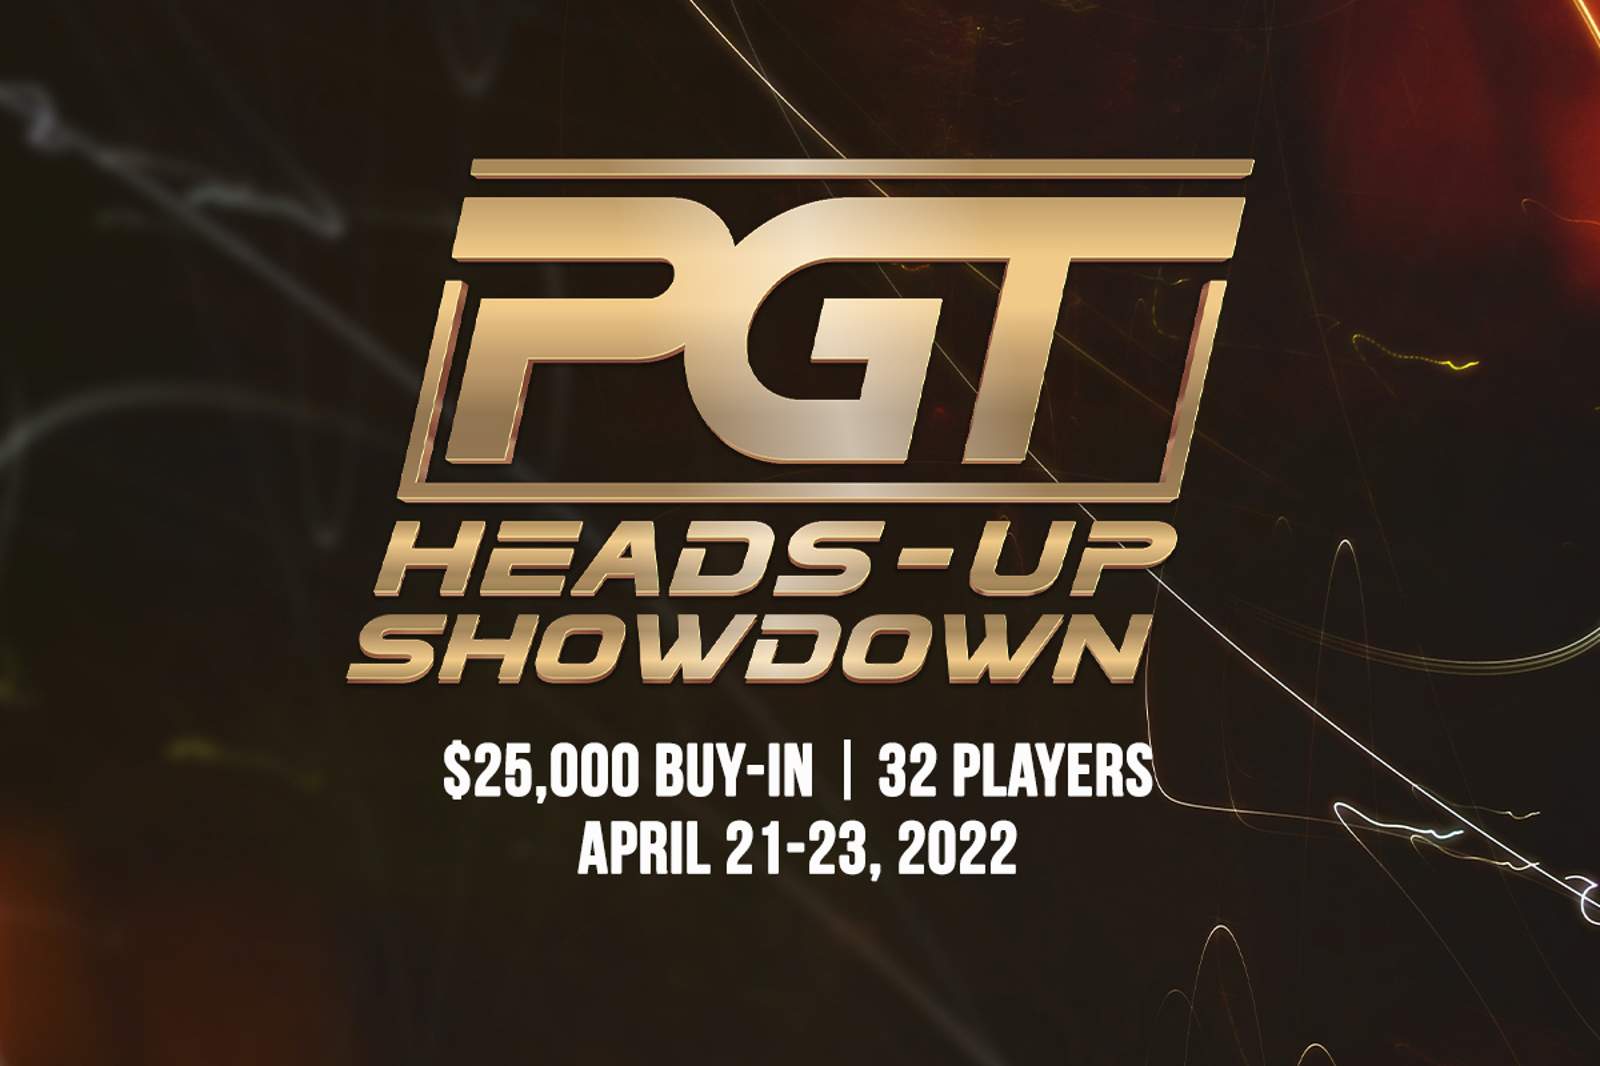 PGT™ Heads-Up Showdown Announced for April 21, 2022